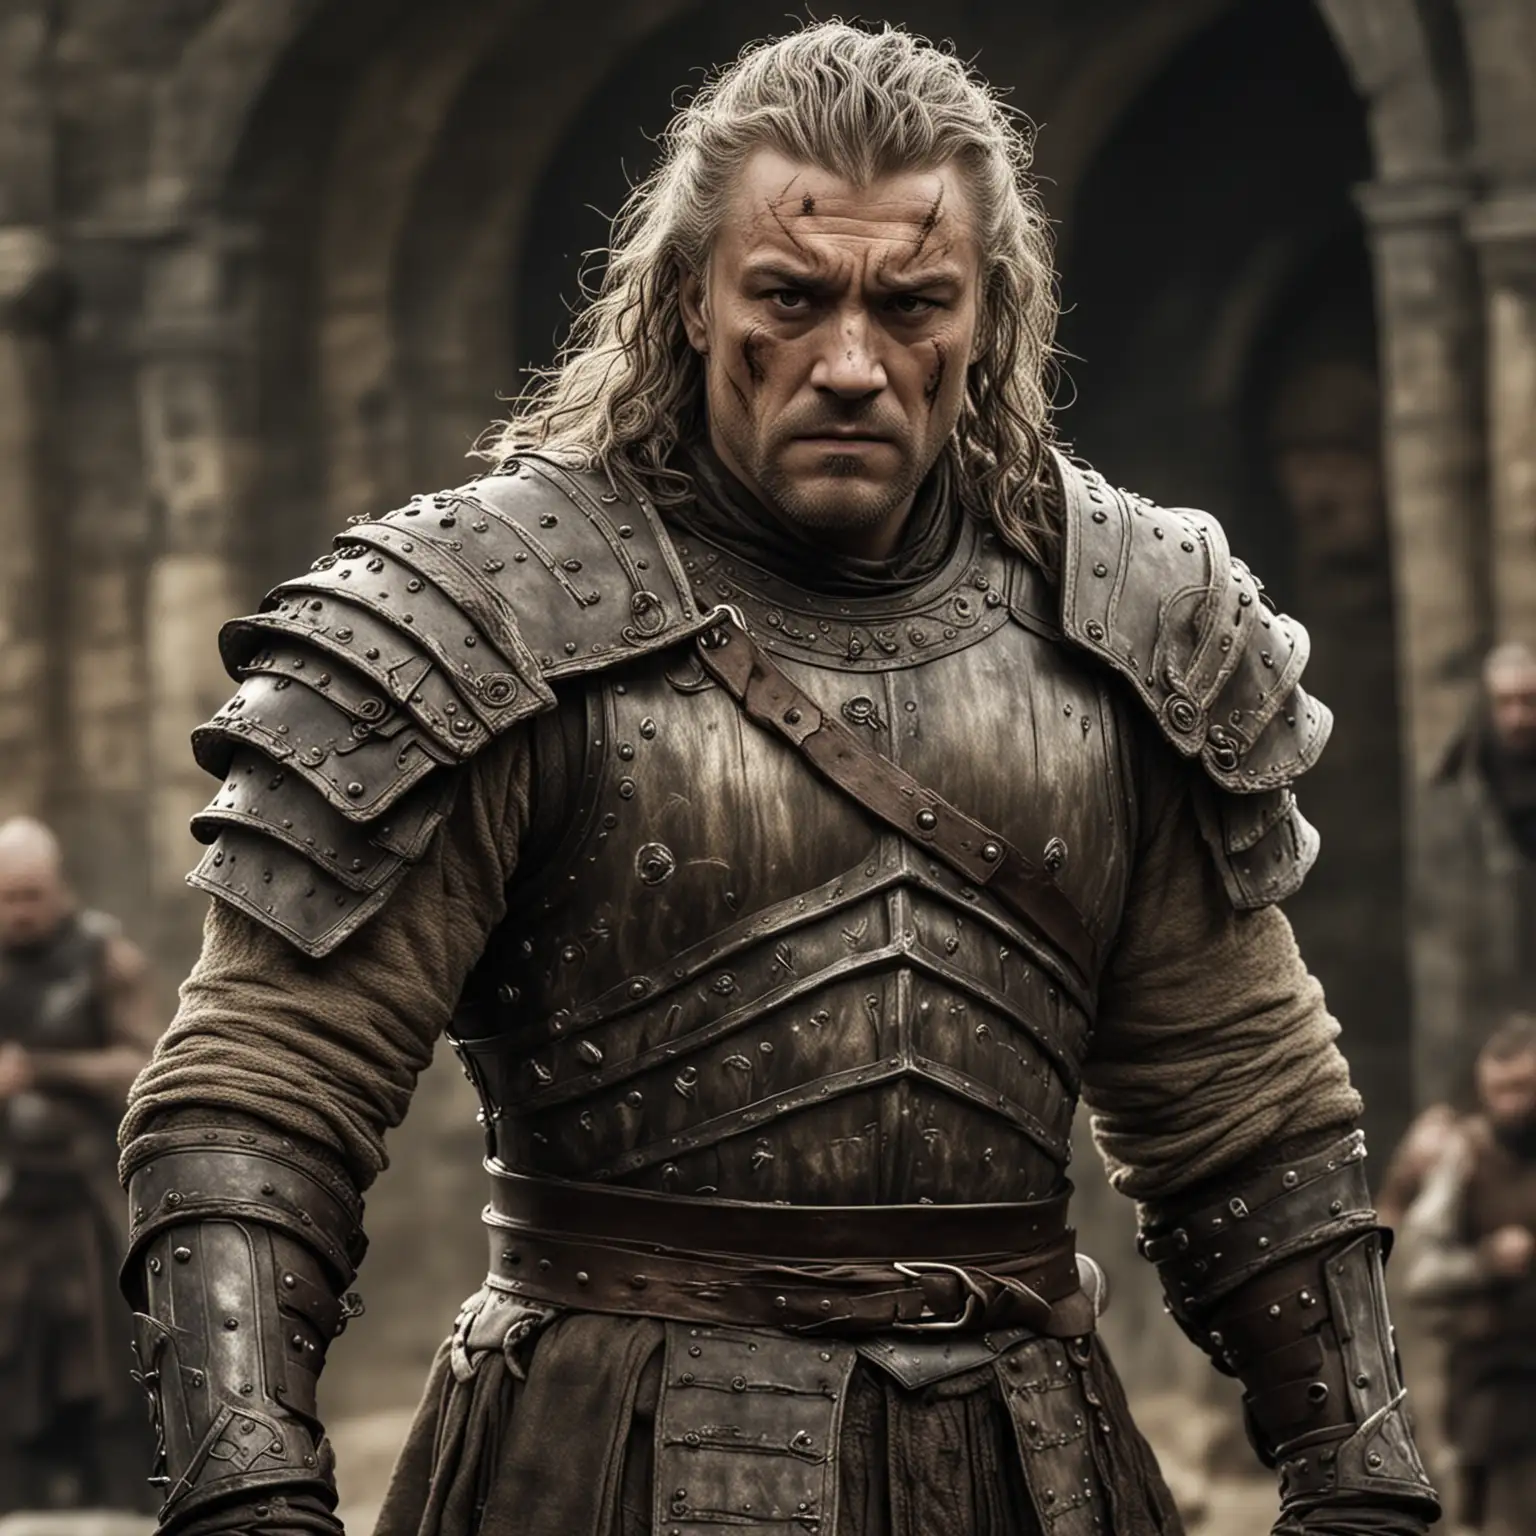 Greatjon Umber an old but heavily muscled and formidable warrior with large fists and grey untidy hair wearing armor in Game of Thrones